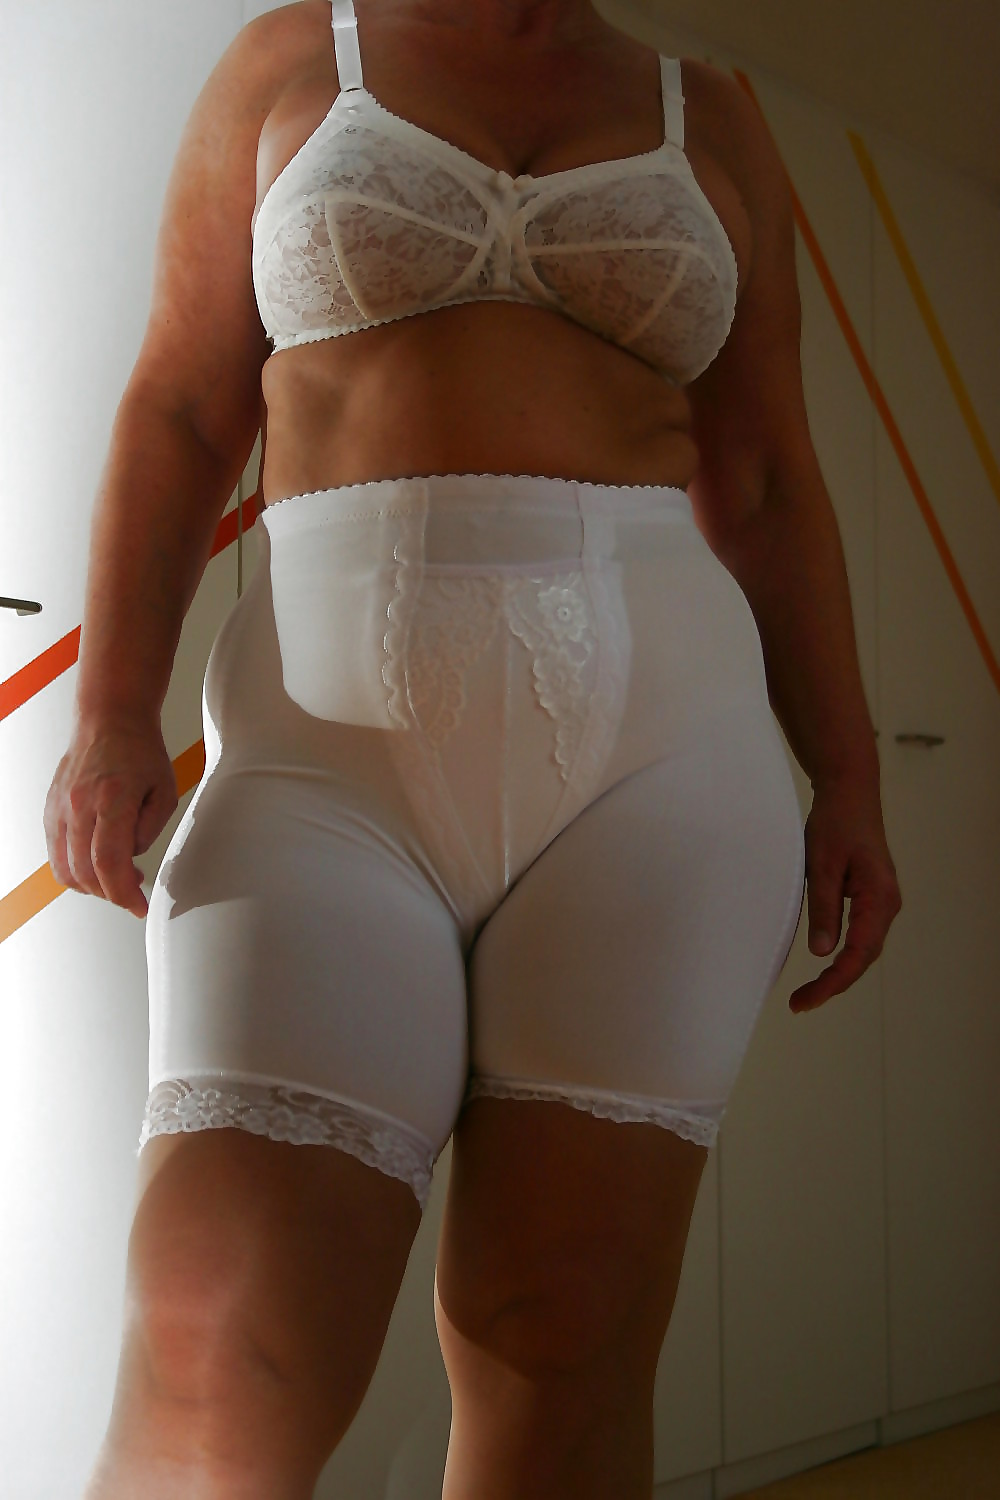 Housewives in girdles fucking